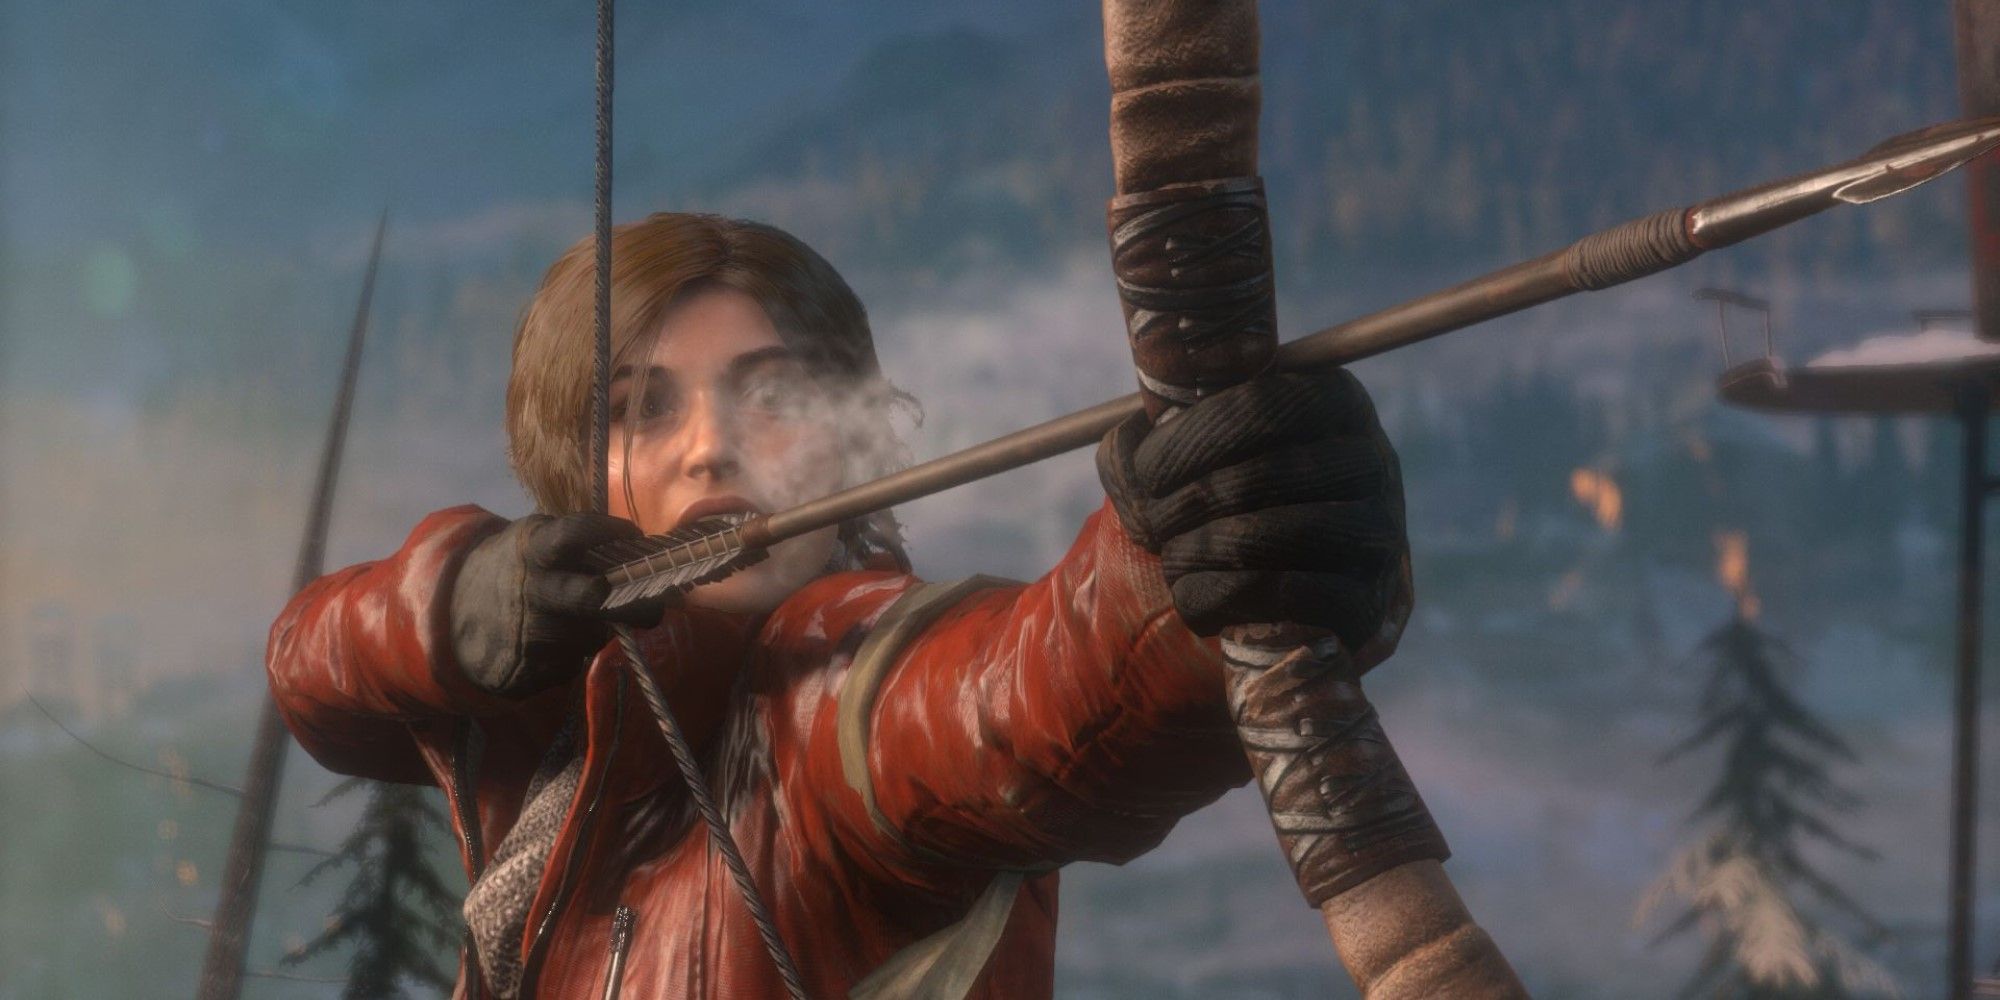 Lara uses her bow and arrow in Rise of the Tomb Raider